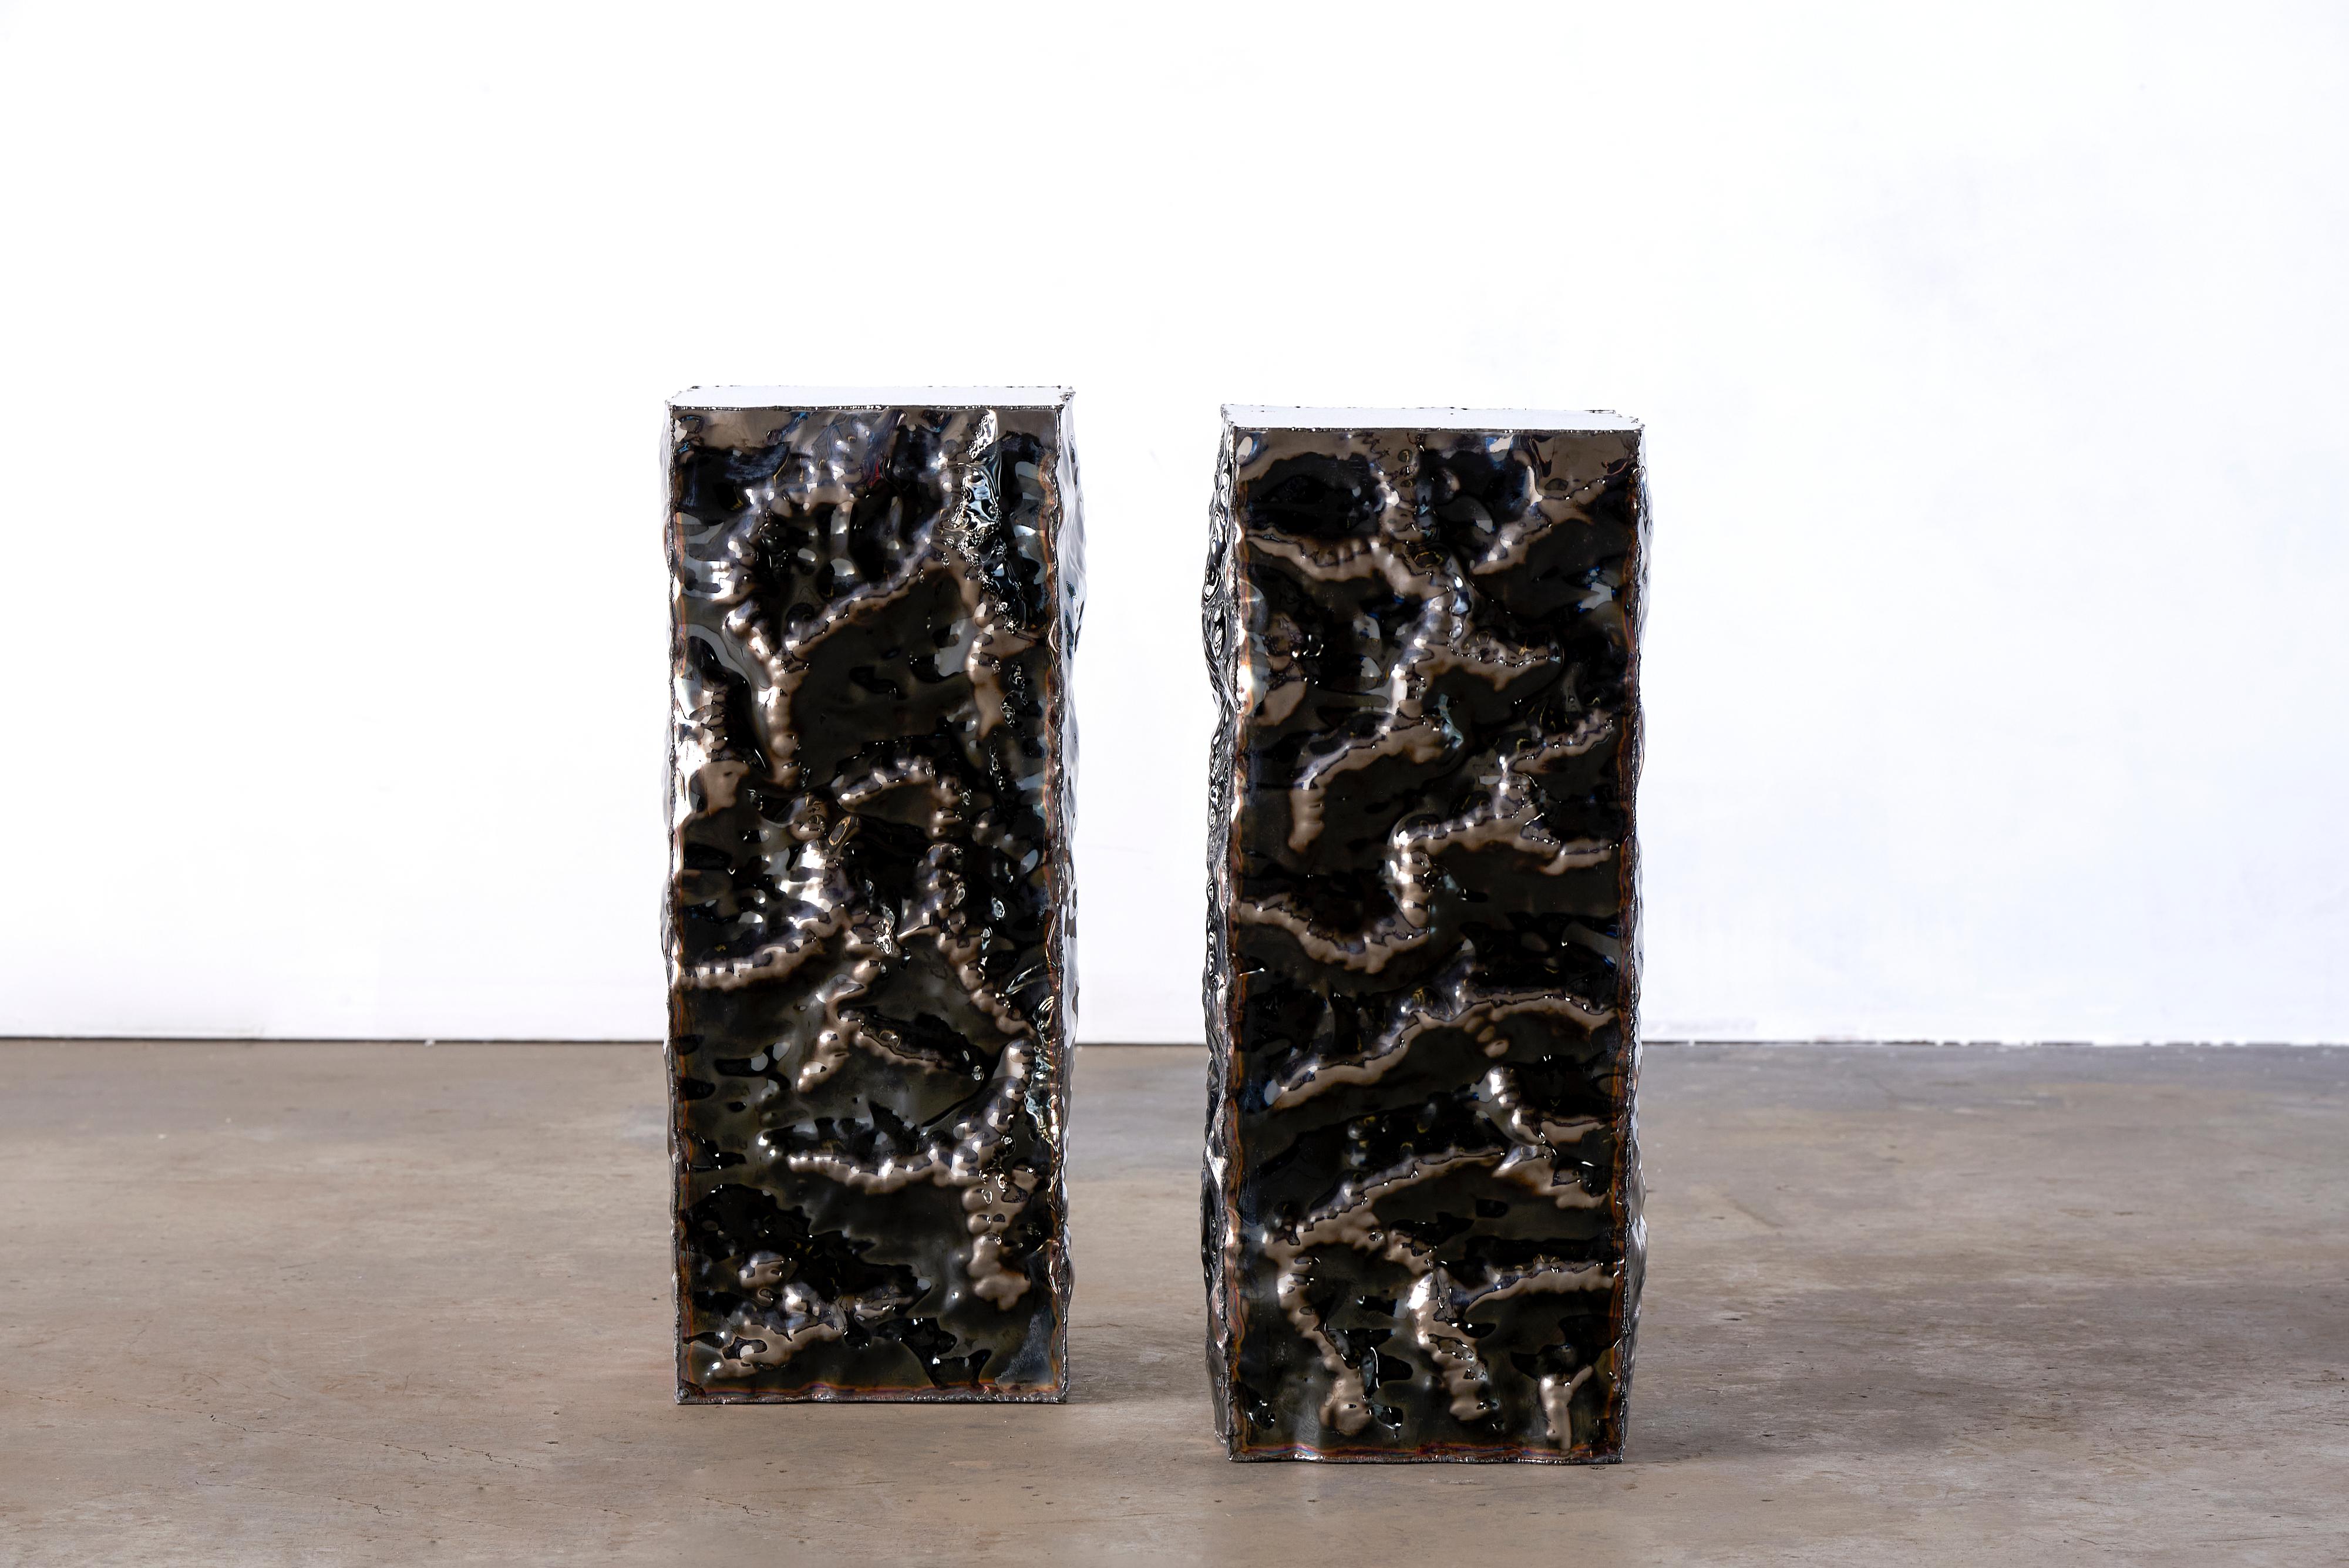 Set of 2 crinkle plinths by Michael Gittings Studio
Dimensions: D 30 x W 30 x H 70 cm
Materials: Mirror polished stainless steel

Michael Gittings
Melbourne based designer Michael Gittings aims to
Challenge pre-conceptions around furniture,